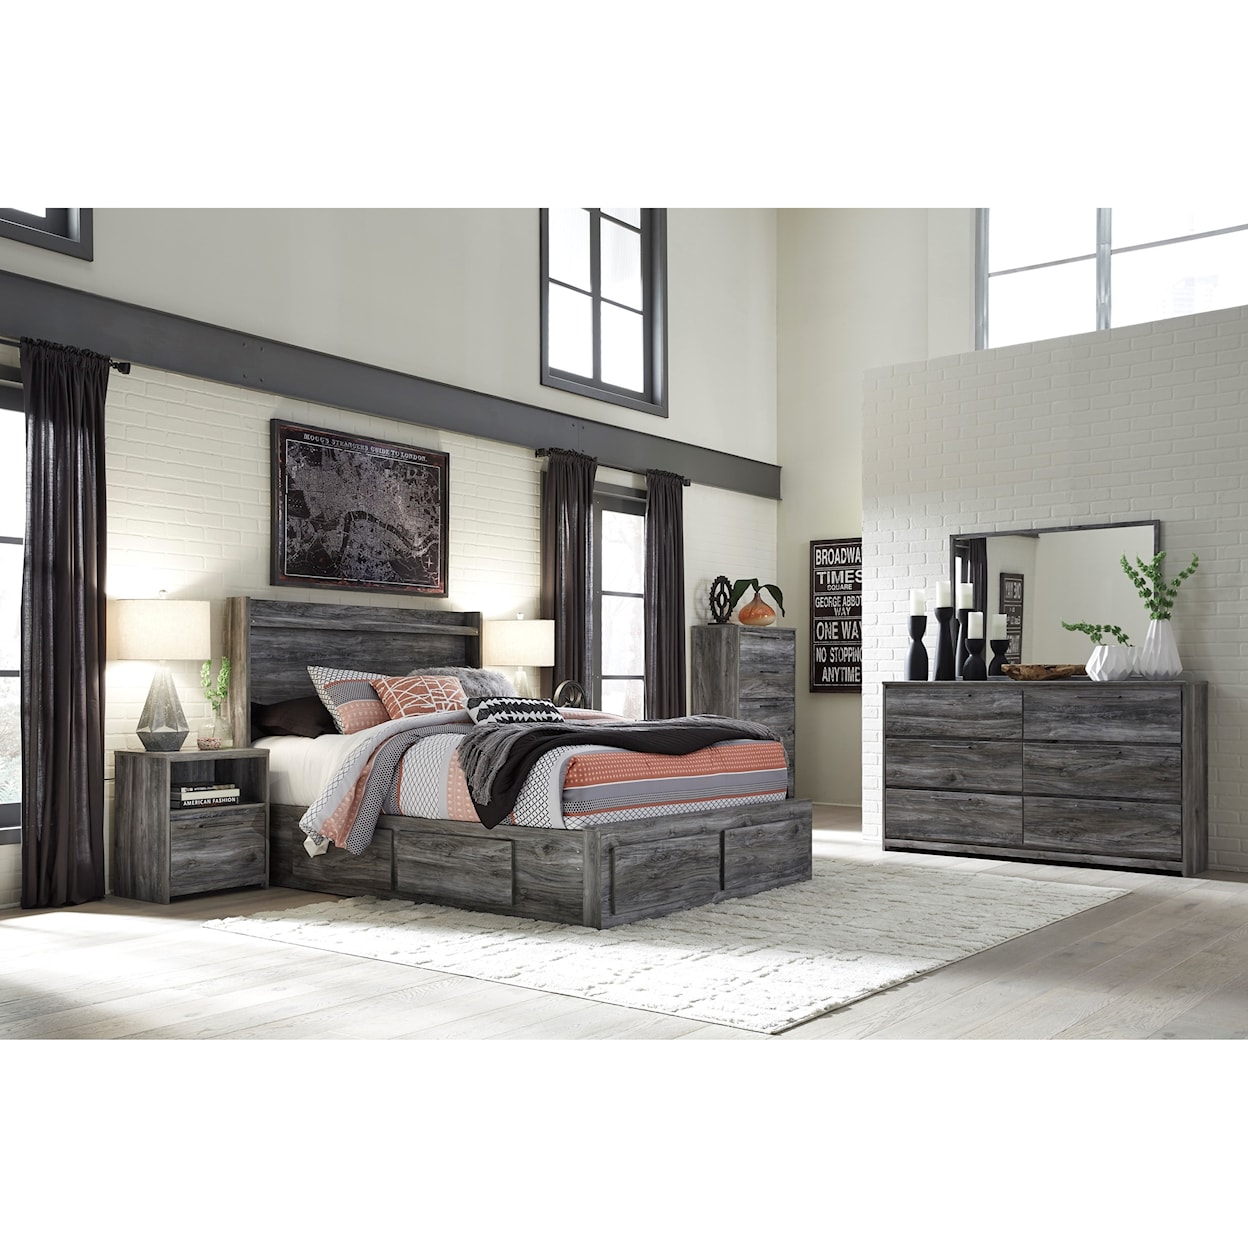 Benchcraft Baystorm Queen Storage Bed with 6 Drawers